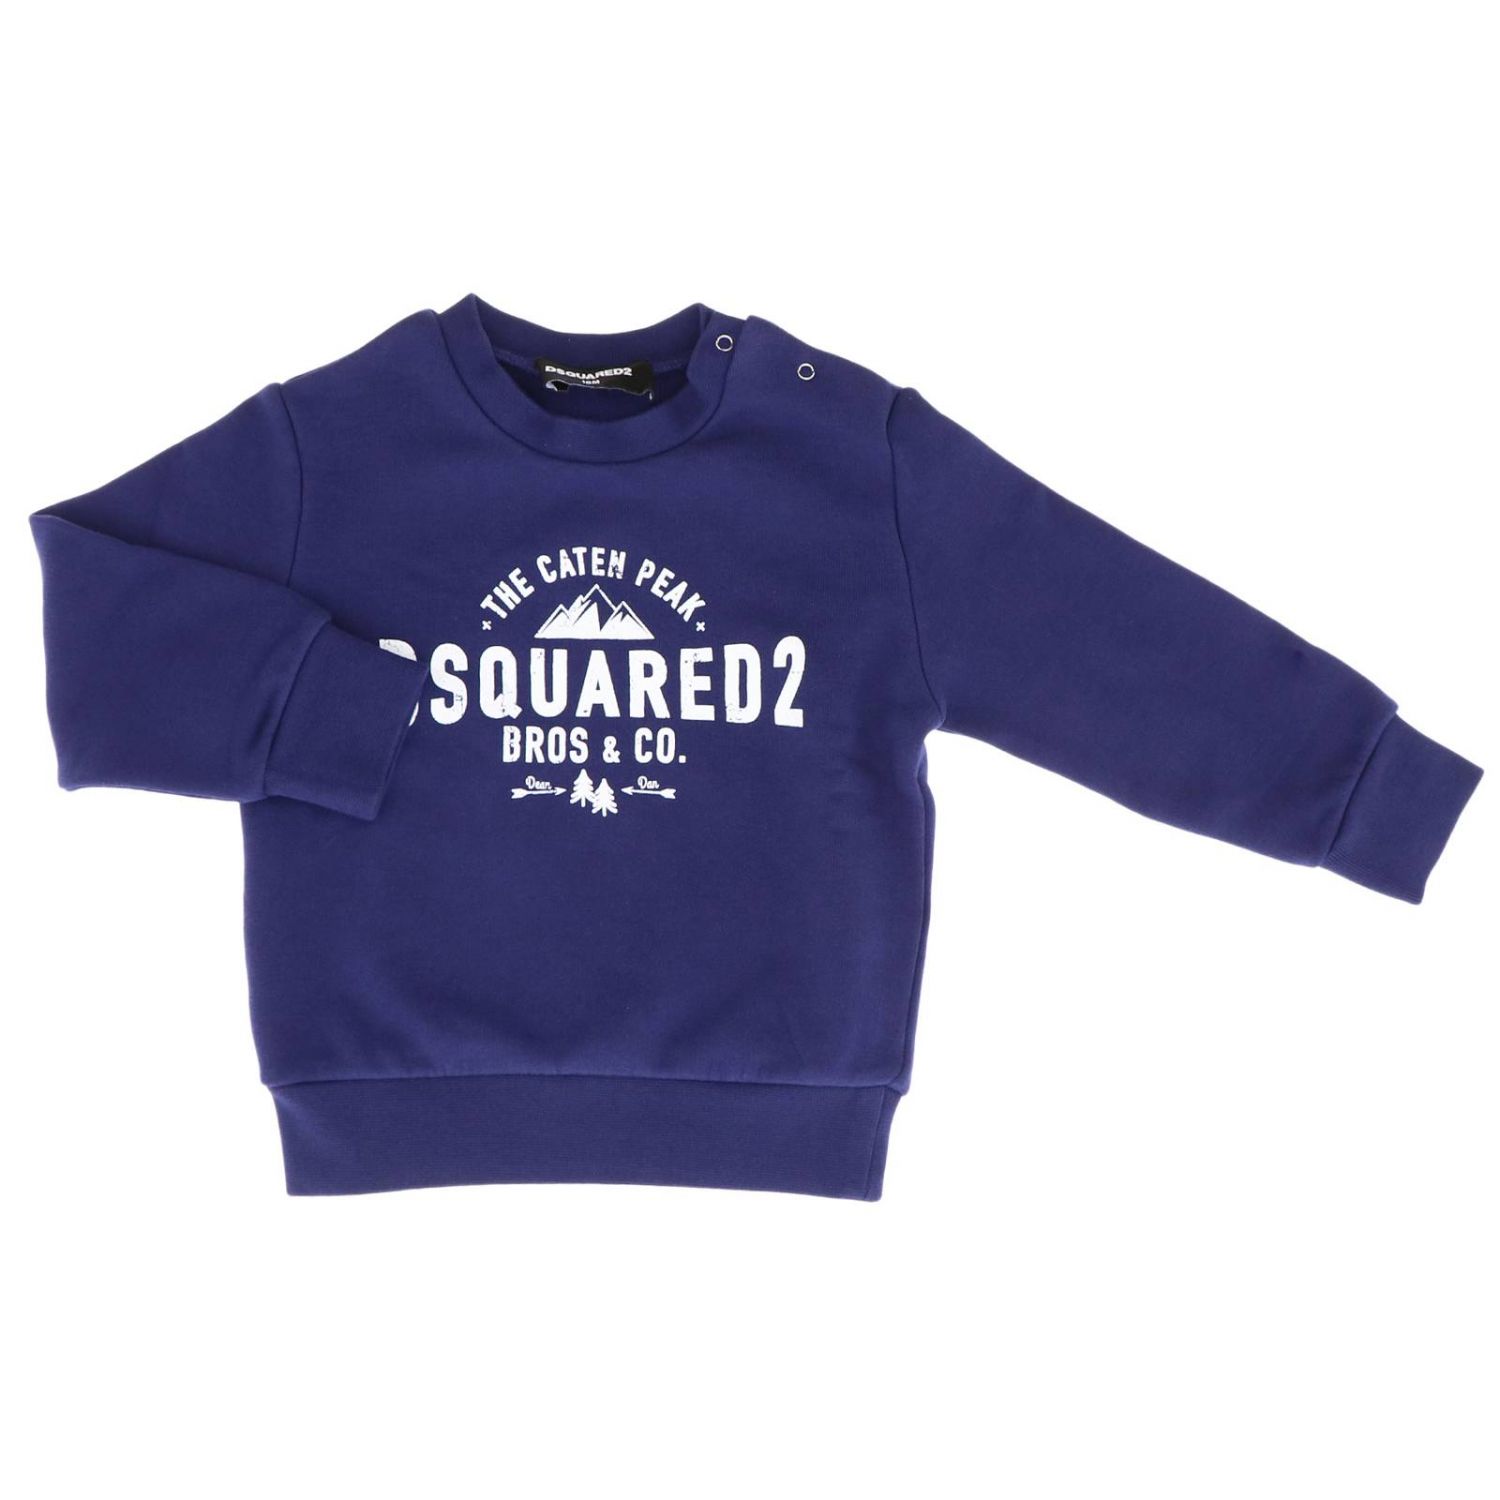 dsquared2 baby jumper